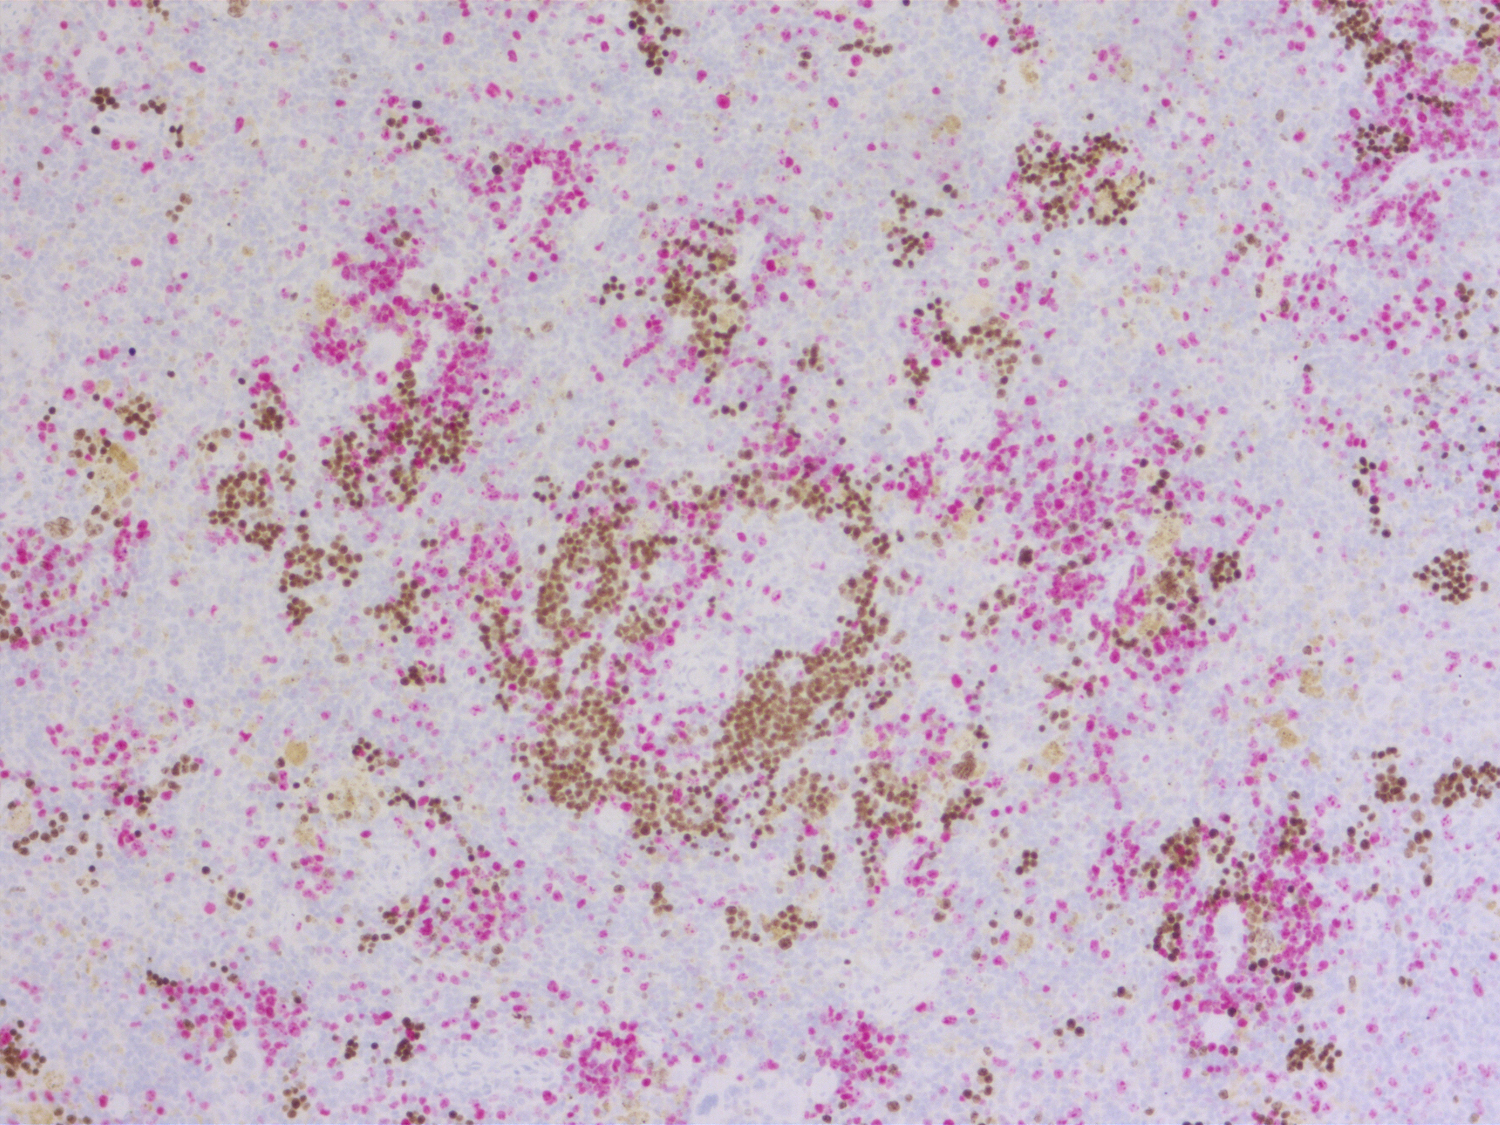 Immunohistochemical doublestaining of formalin-fixed paraffin embedded mouse spleen engrafted with human CD34+-cells using rabbit anti-human Ki67